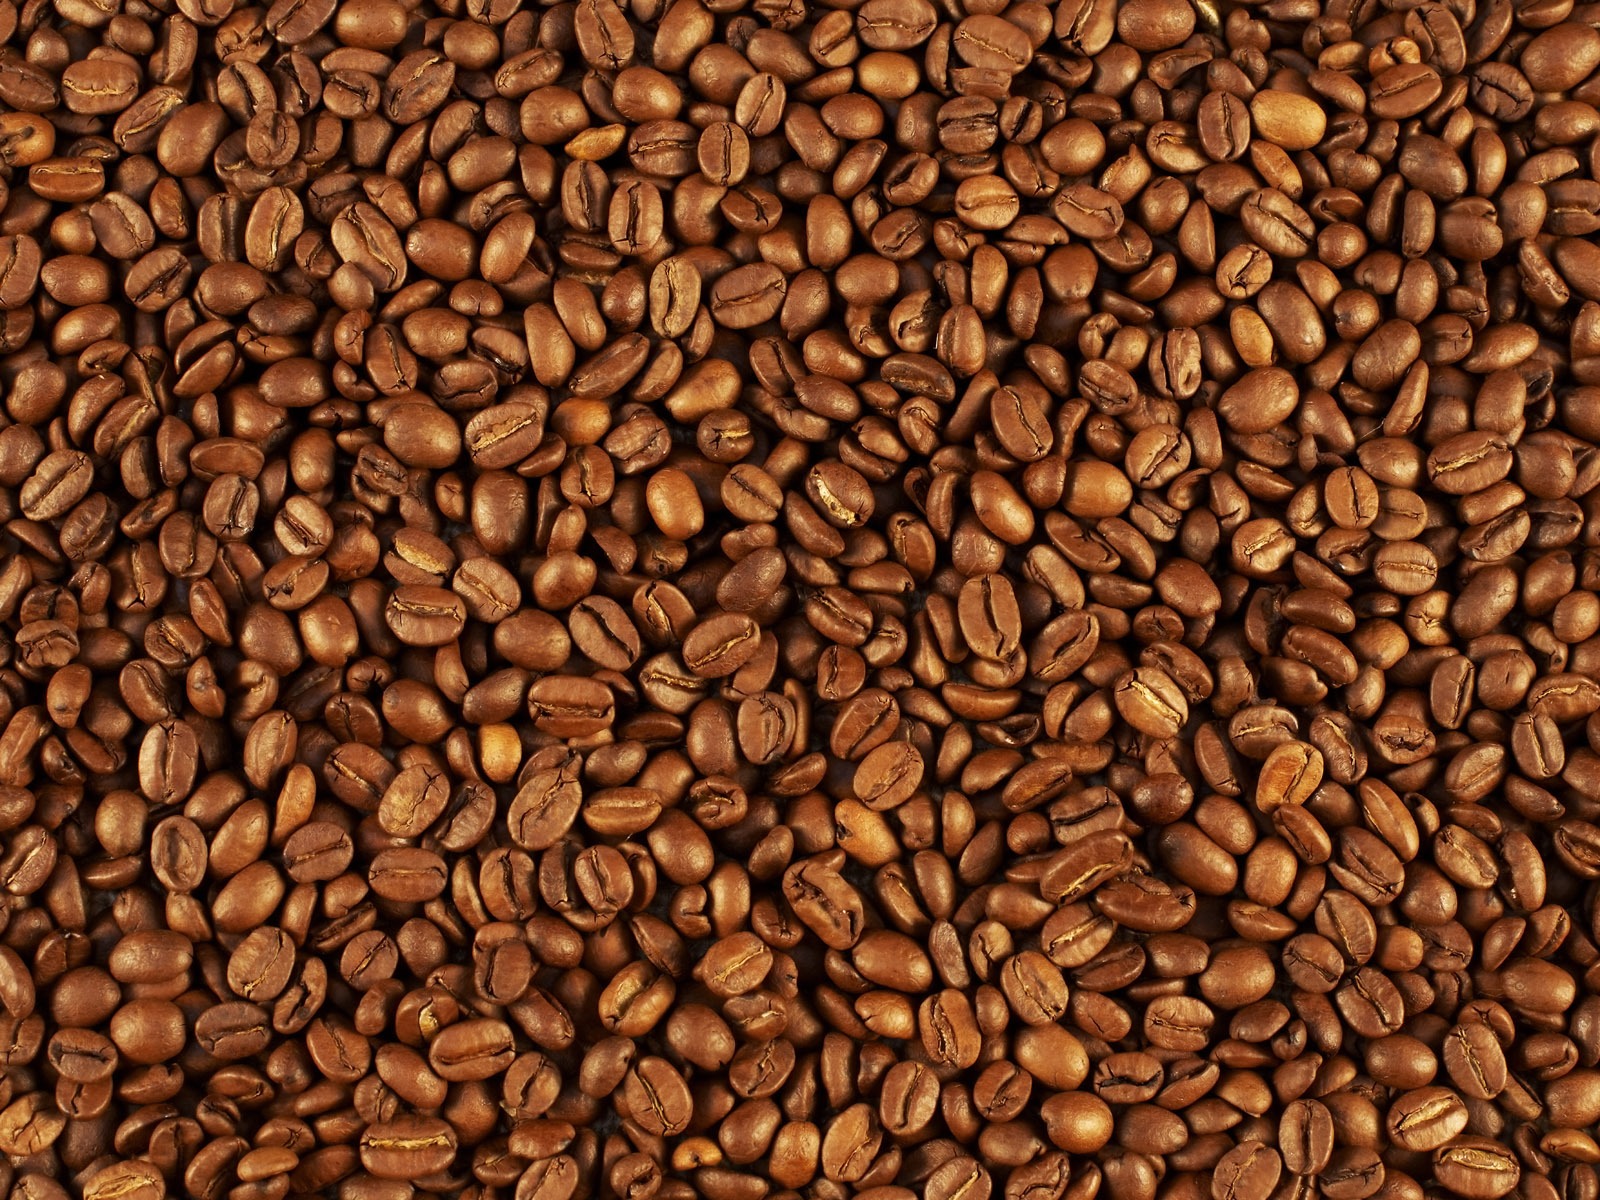 Coffee feature wallpaper (7) #16 - 1600x1200